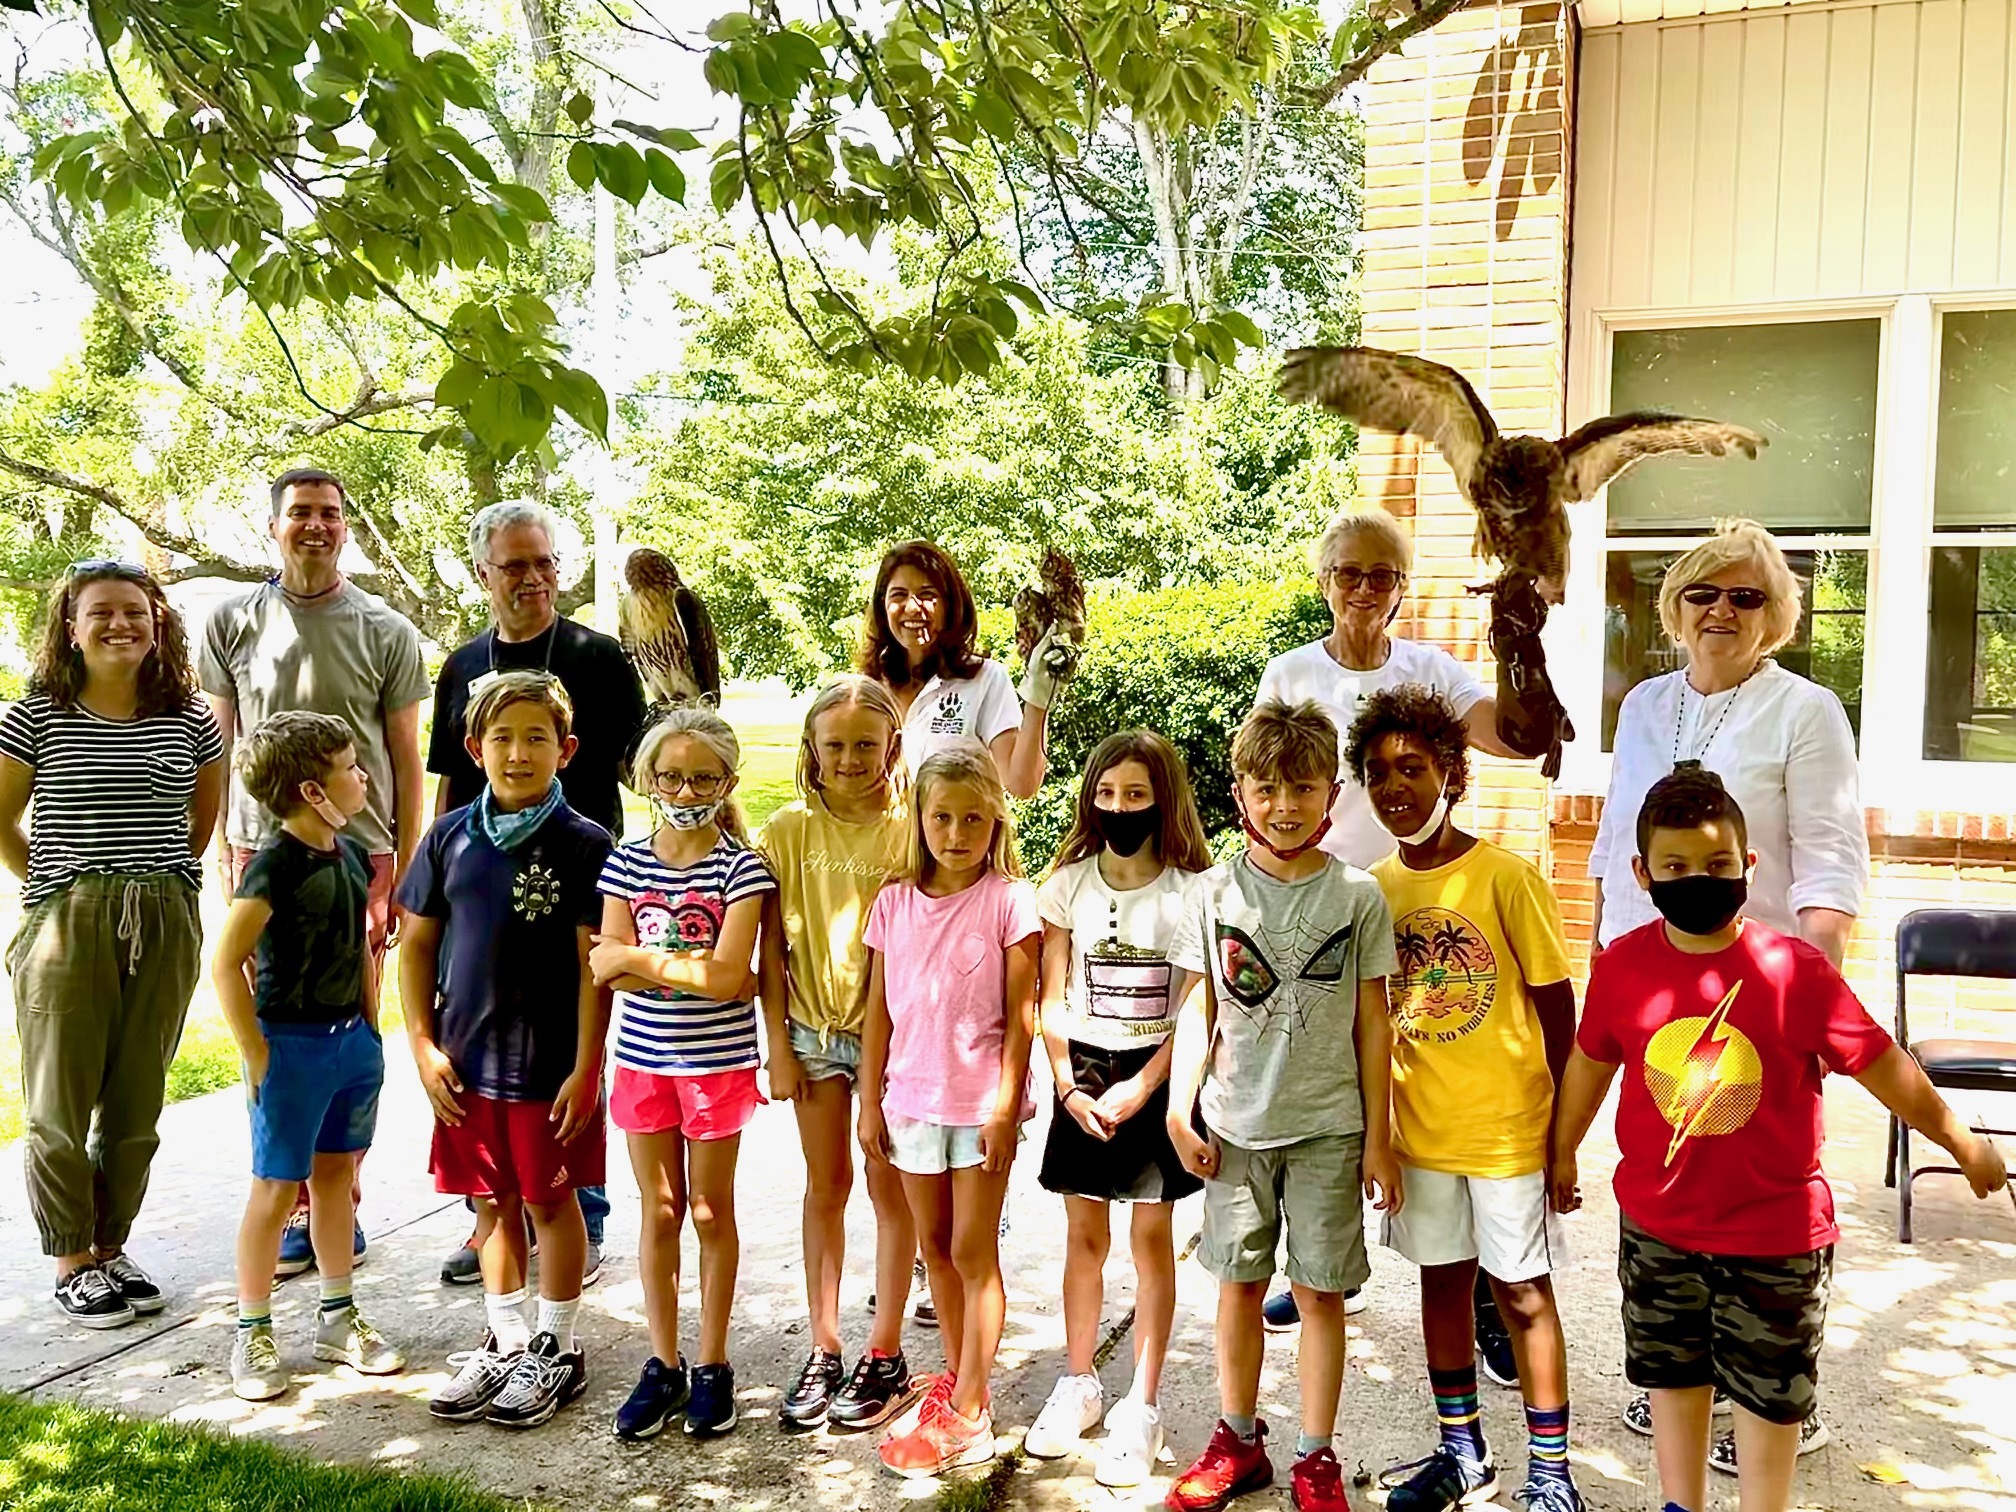 Last week, students at the Sagaponack School welcomed Jane Gill and staff from the Evelyn Alexander Wildlife Rescue Center to the school, where they shared some of the birds that call the Center home. Students in kindergarten through second grade learned about local raptors and got up close and personal with their new feathery friends.